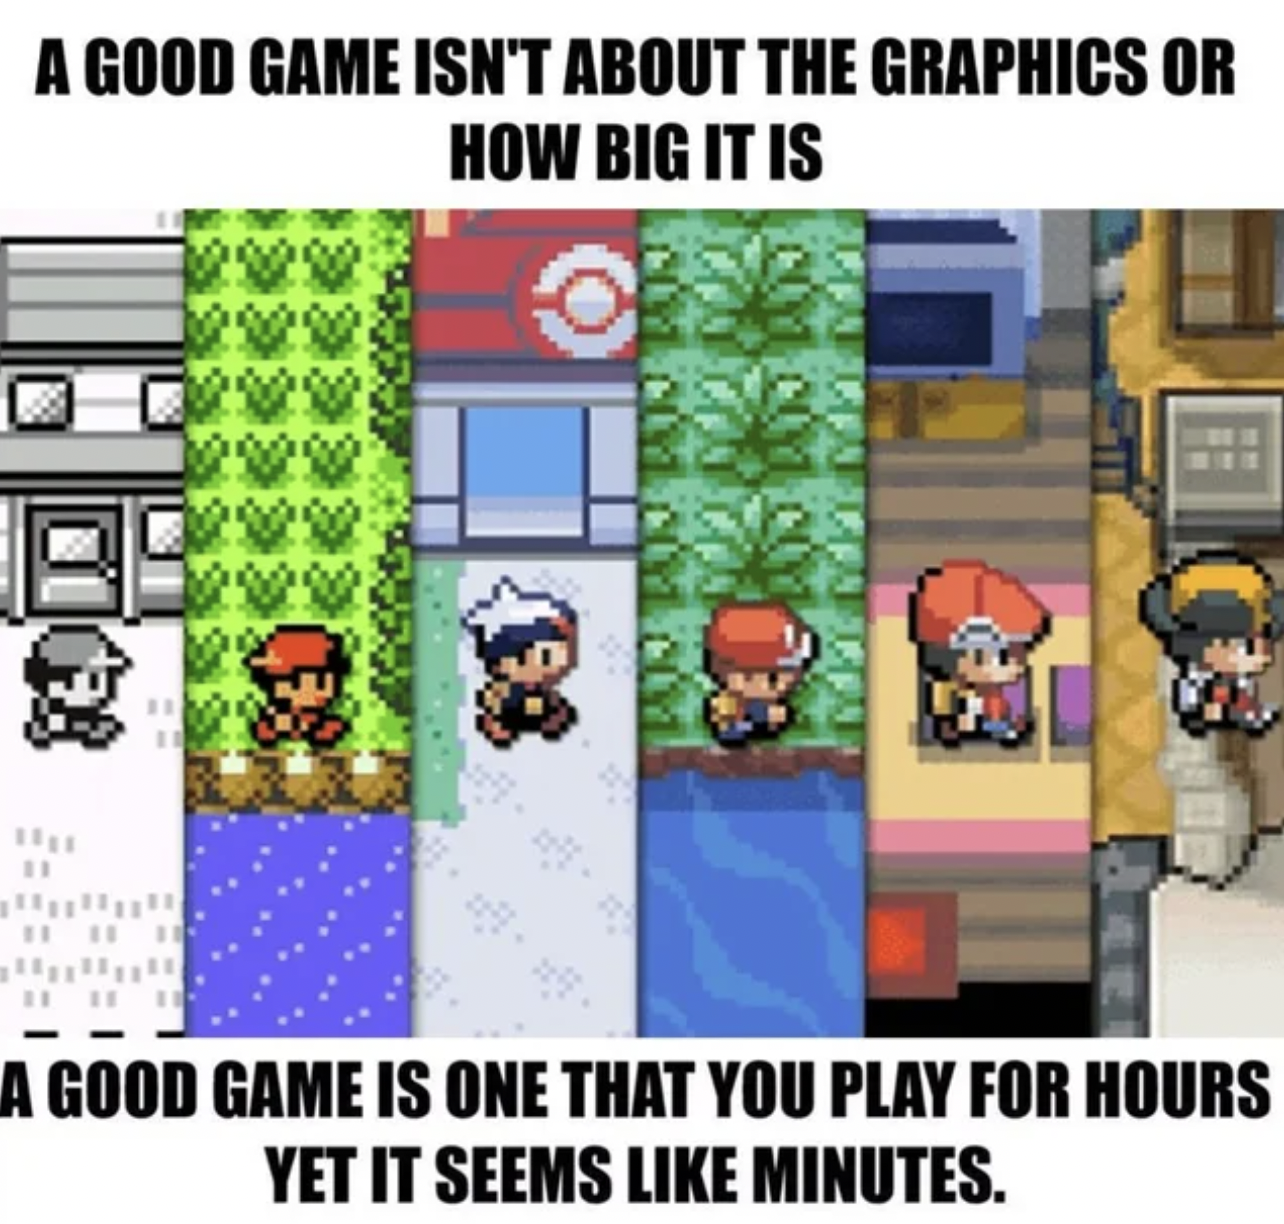 Gaming memes - 8 bit pokemon games - A Good Game Isn'T About The Graphics Or How Big It Is 11 3.9 201 Por Far Park Bors Tagpalas Par A Good Game Is One That You Play For Hours Yet It Seems Minutes.